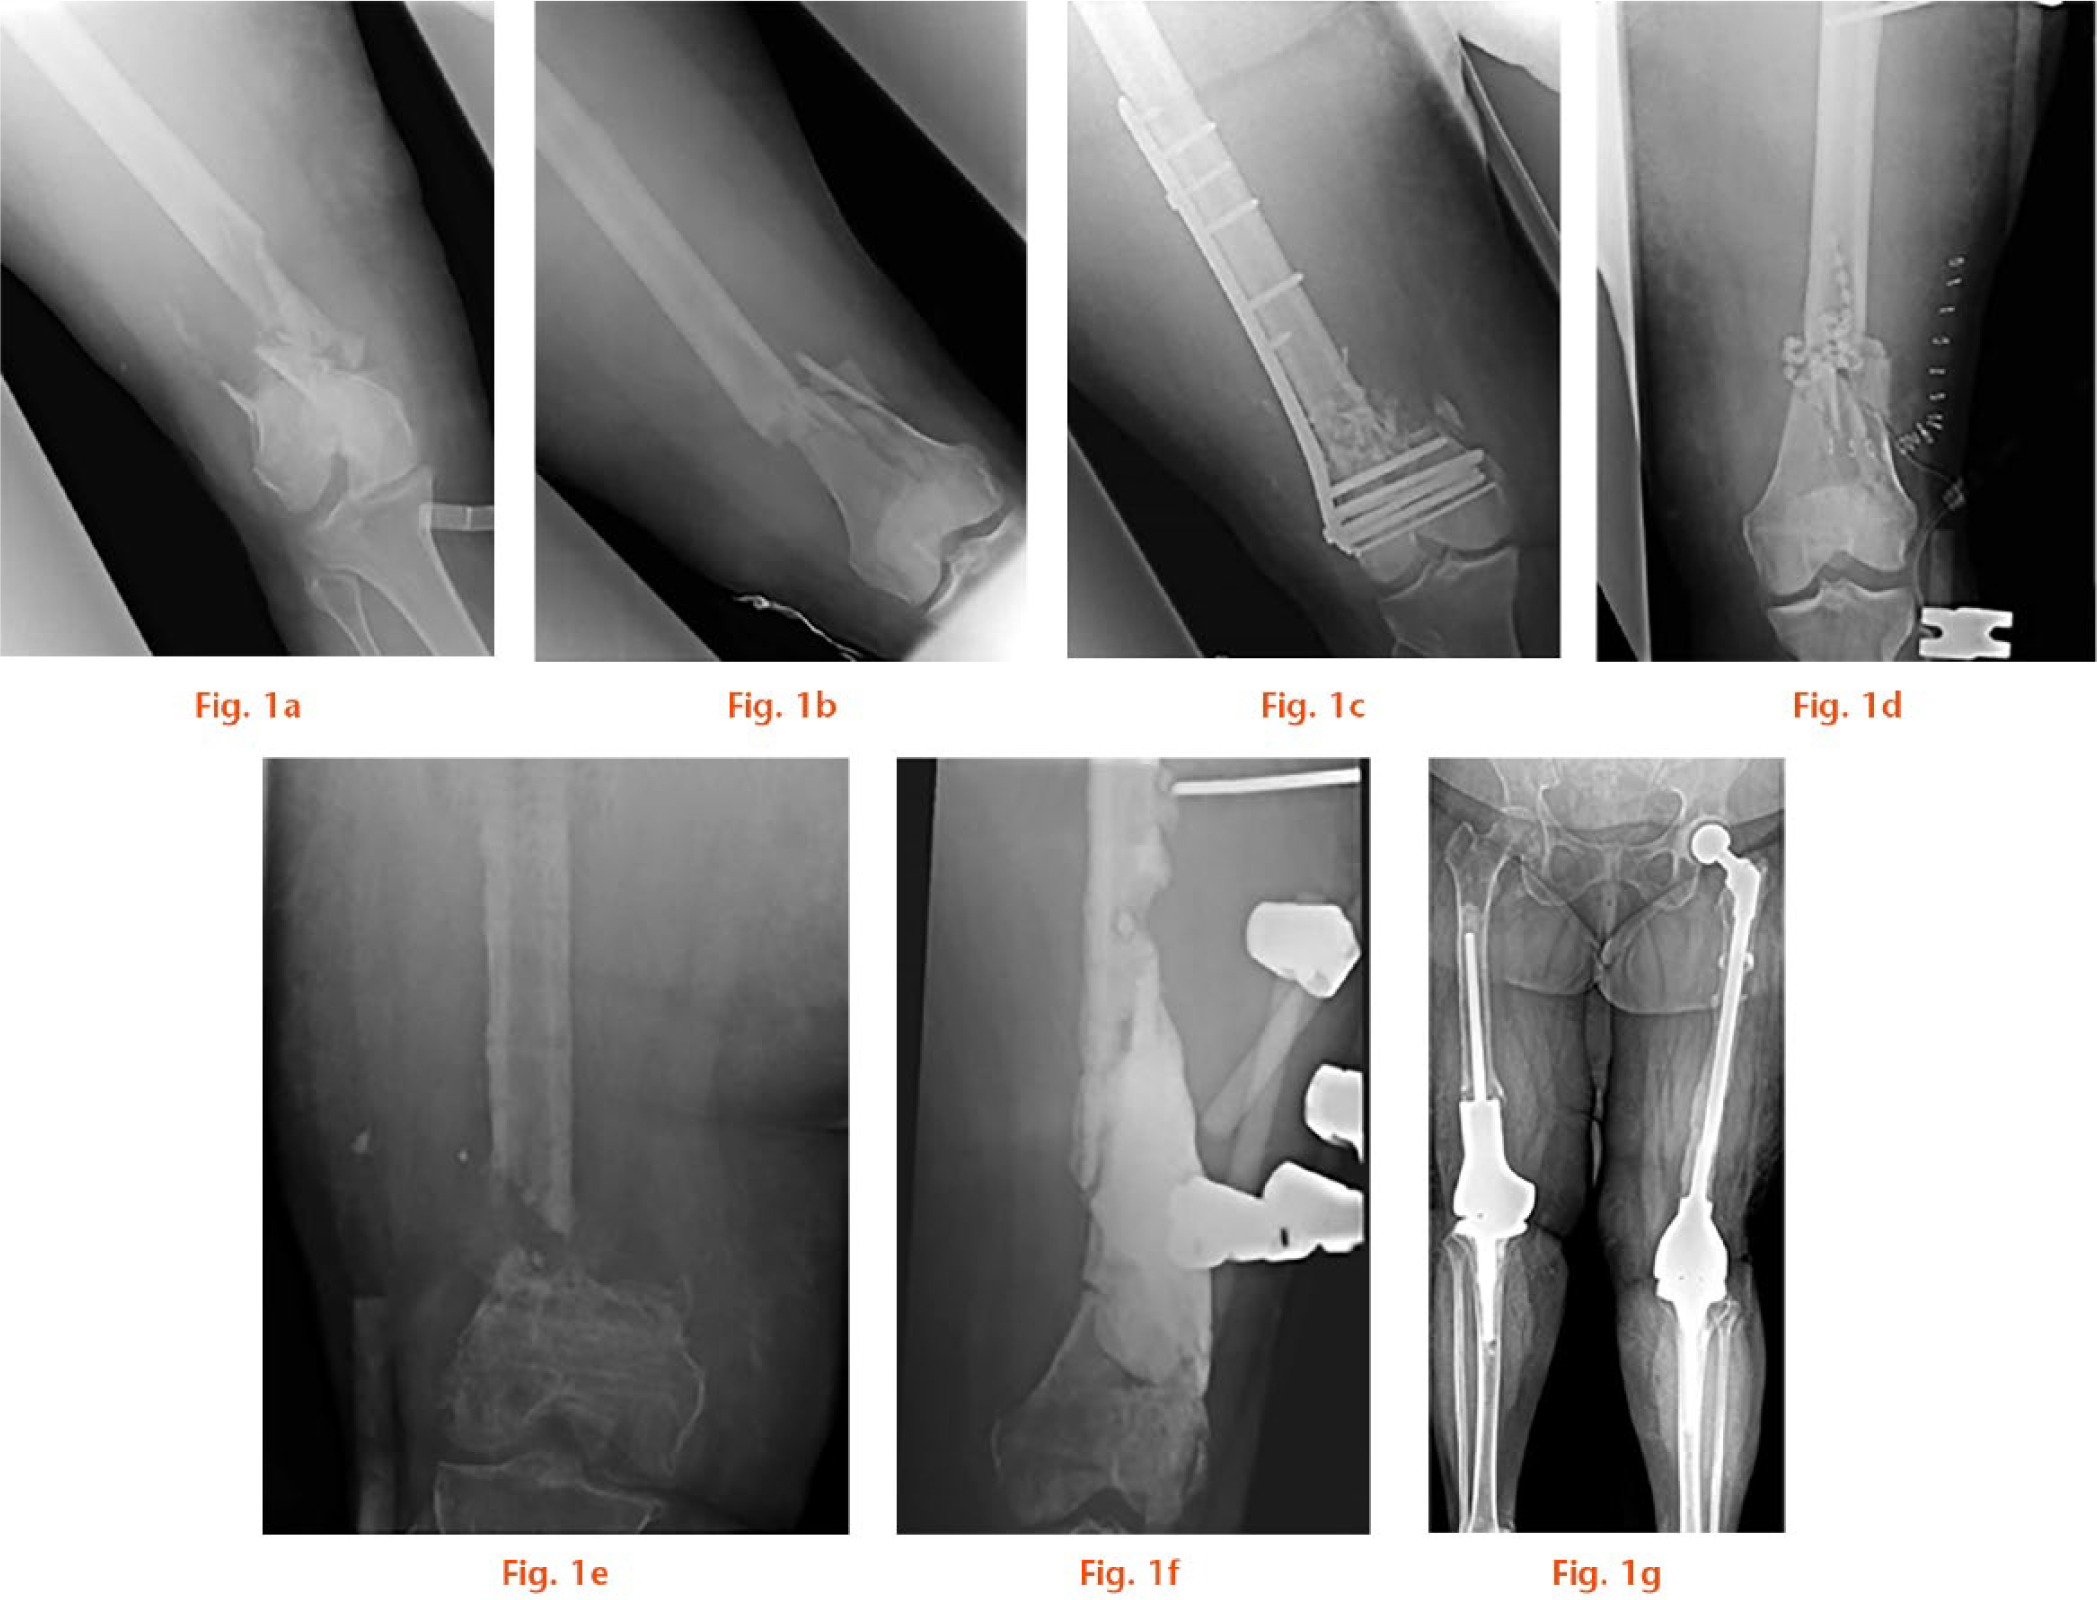  
          Radiological time course of 59-year-old female patient after bilateral open distal femoral fractures (a, c, e: right leg; b, d, f: left leg). a) and b) radiographs at admission with bilateral femoral comminuted fractures. Of note is the bone deficiency on the right femur immediately after injury. c) and d) The status after initial stabilization. Note the shortening and comminution of the right distal femur and the gentamicin beads in the femoral canal of the left femur indicating post-traumatic infection therapy. e) Images after removal of the plate and external stabilization of the right femur. Note the atrophic nonunion, indicating biological inhibition of bone healing. f) Radiographs after removal of avital femoral bone and temporary replacement with antibiotic-loaded bone cement of the left femur. g) Latest radiograph of the follow-up showing both knees replaced with distal femoral replacements; on the left limb, a total femoral replacement was necessary due to the too small residuum of the femur after resecting all infected and dead bone.
        